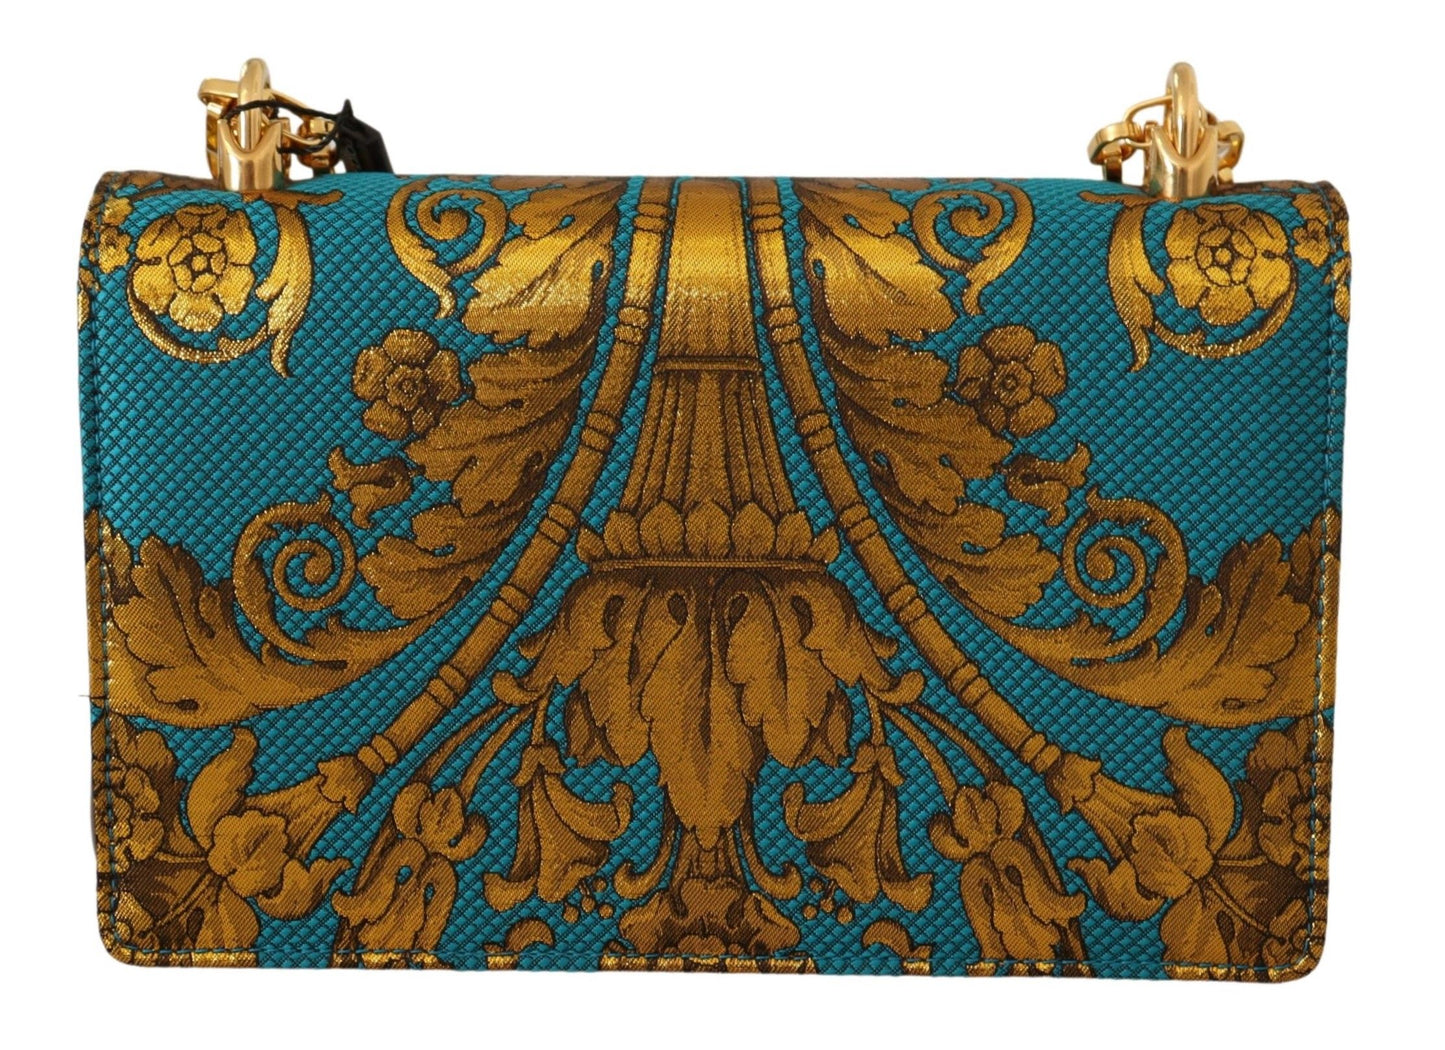 Elegant Gold Baroque Clutch with Chain Strap